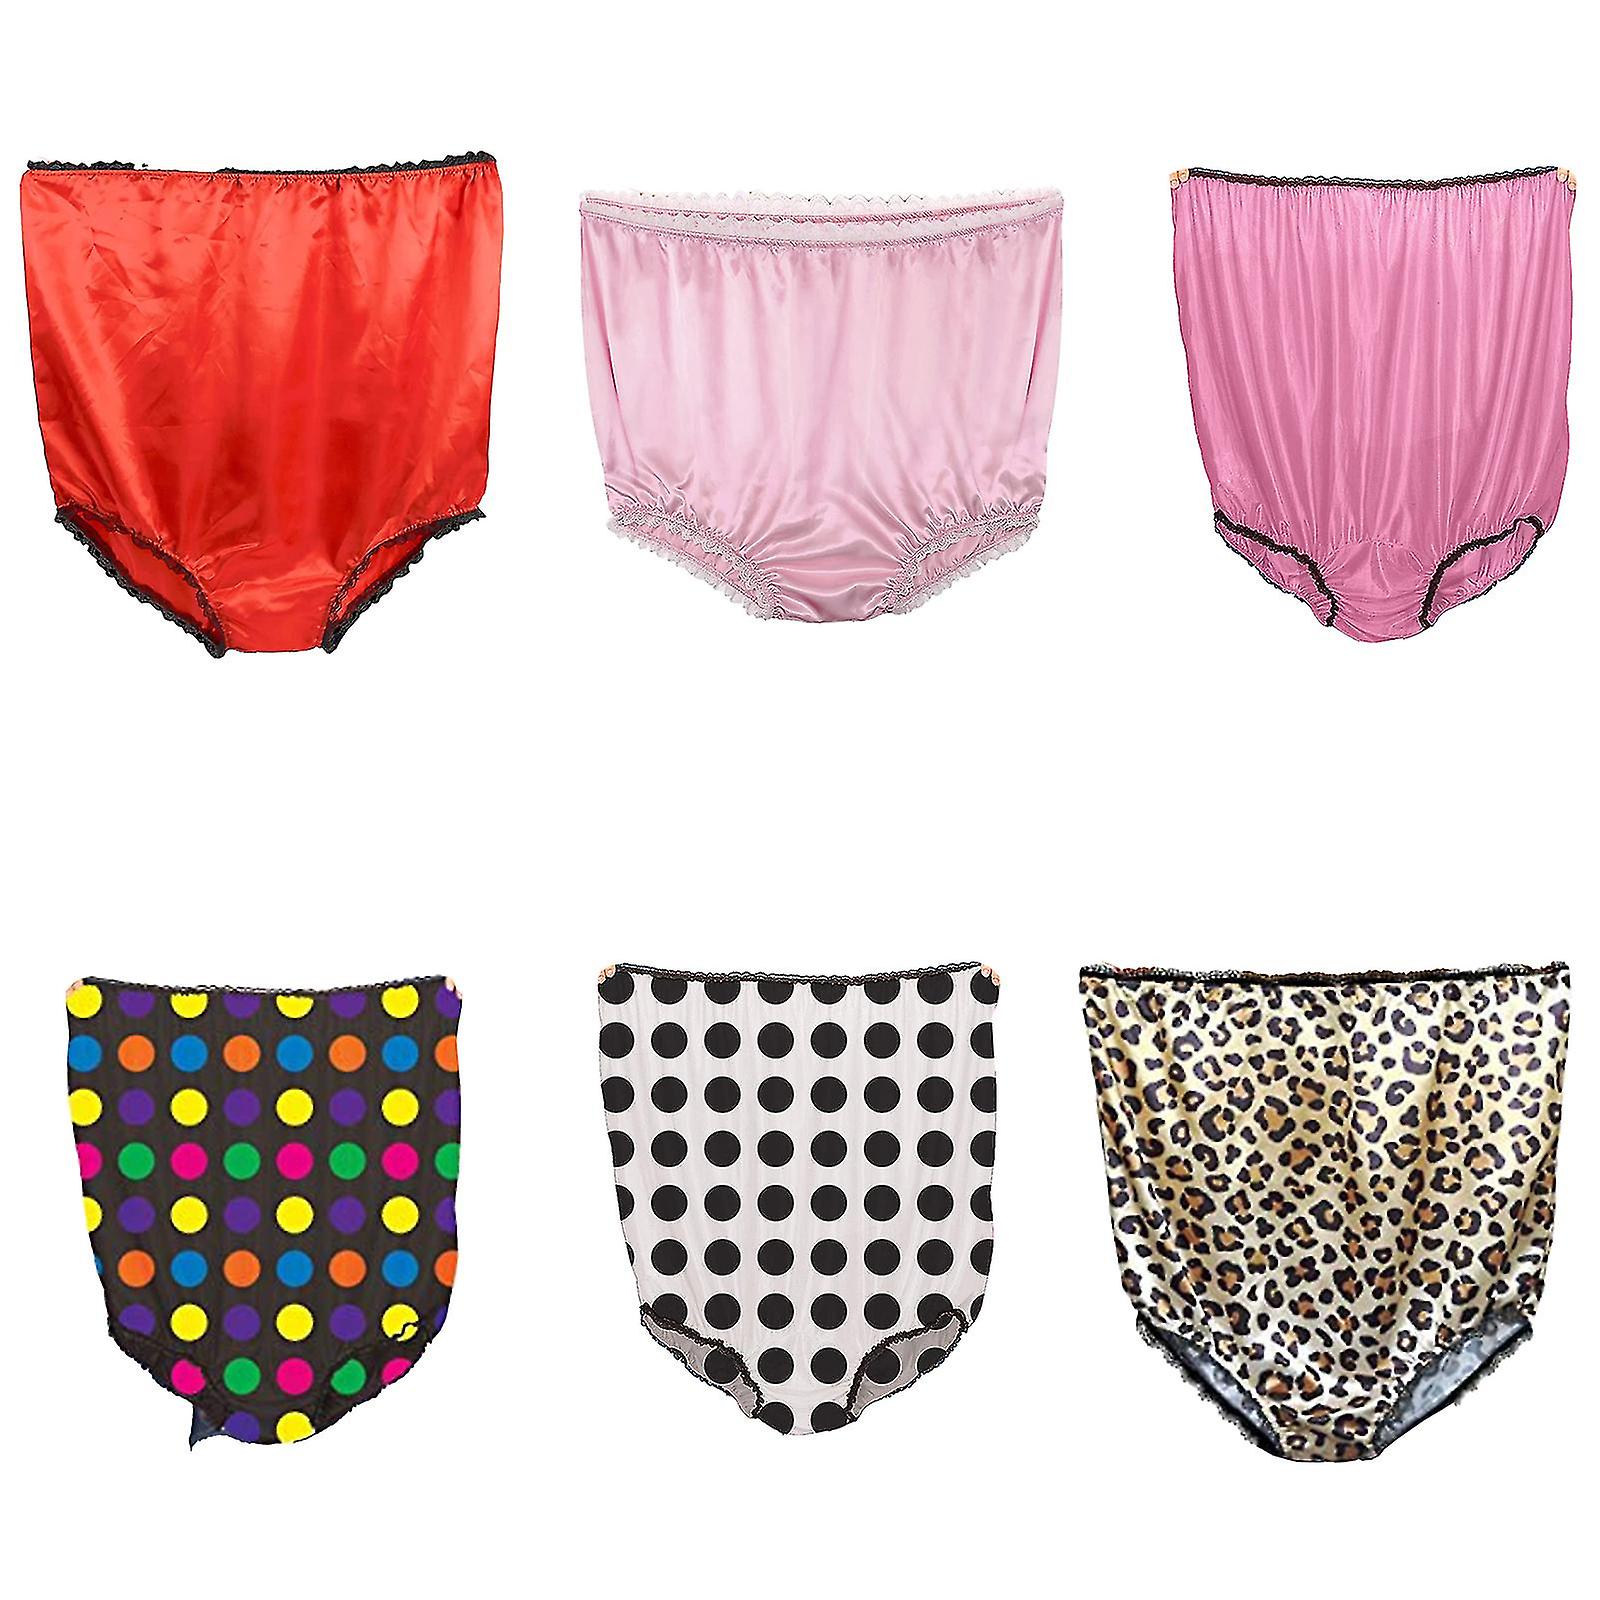 caitlyn basham recommends granny panties pattern pic